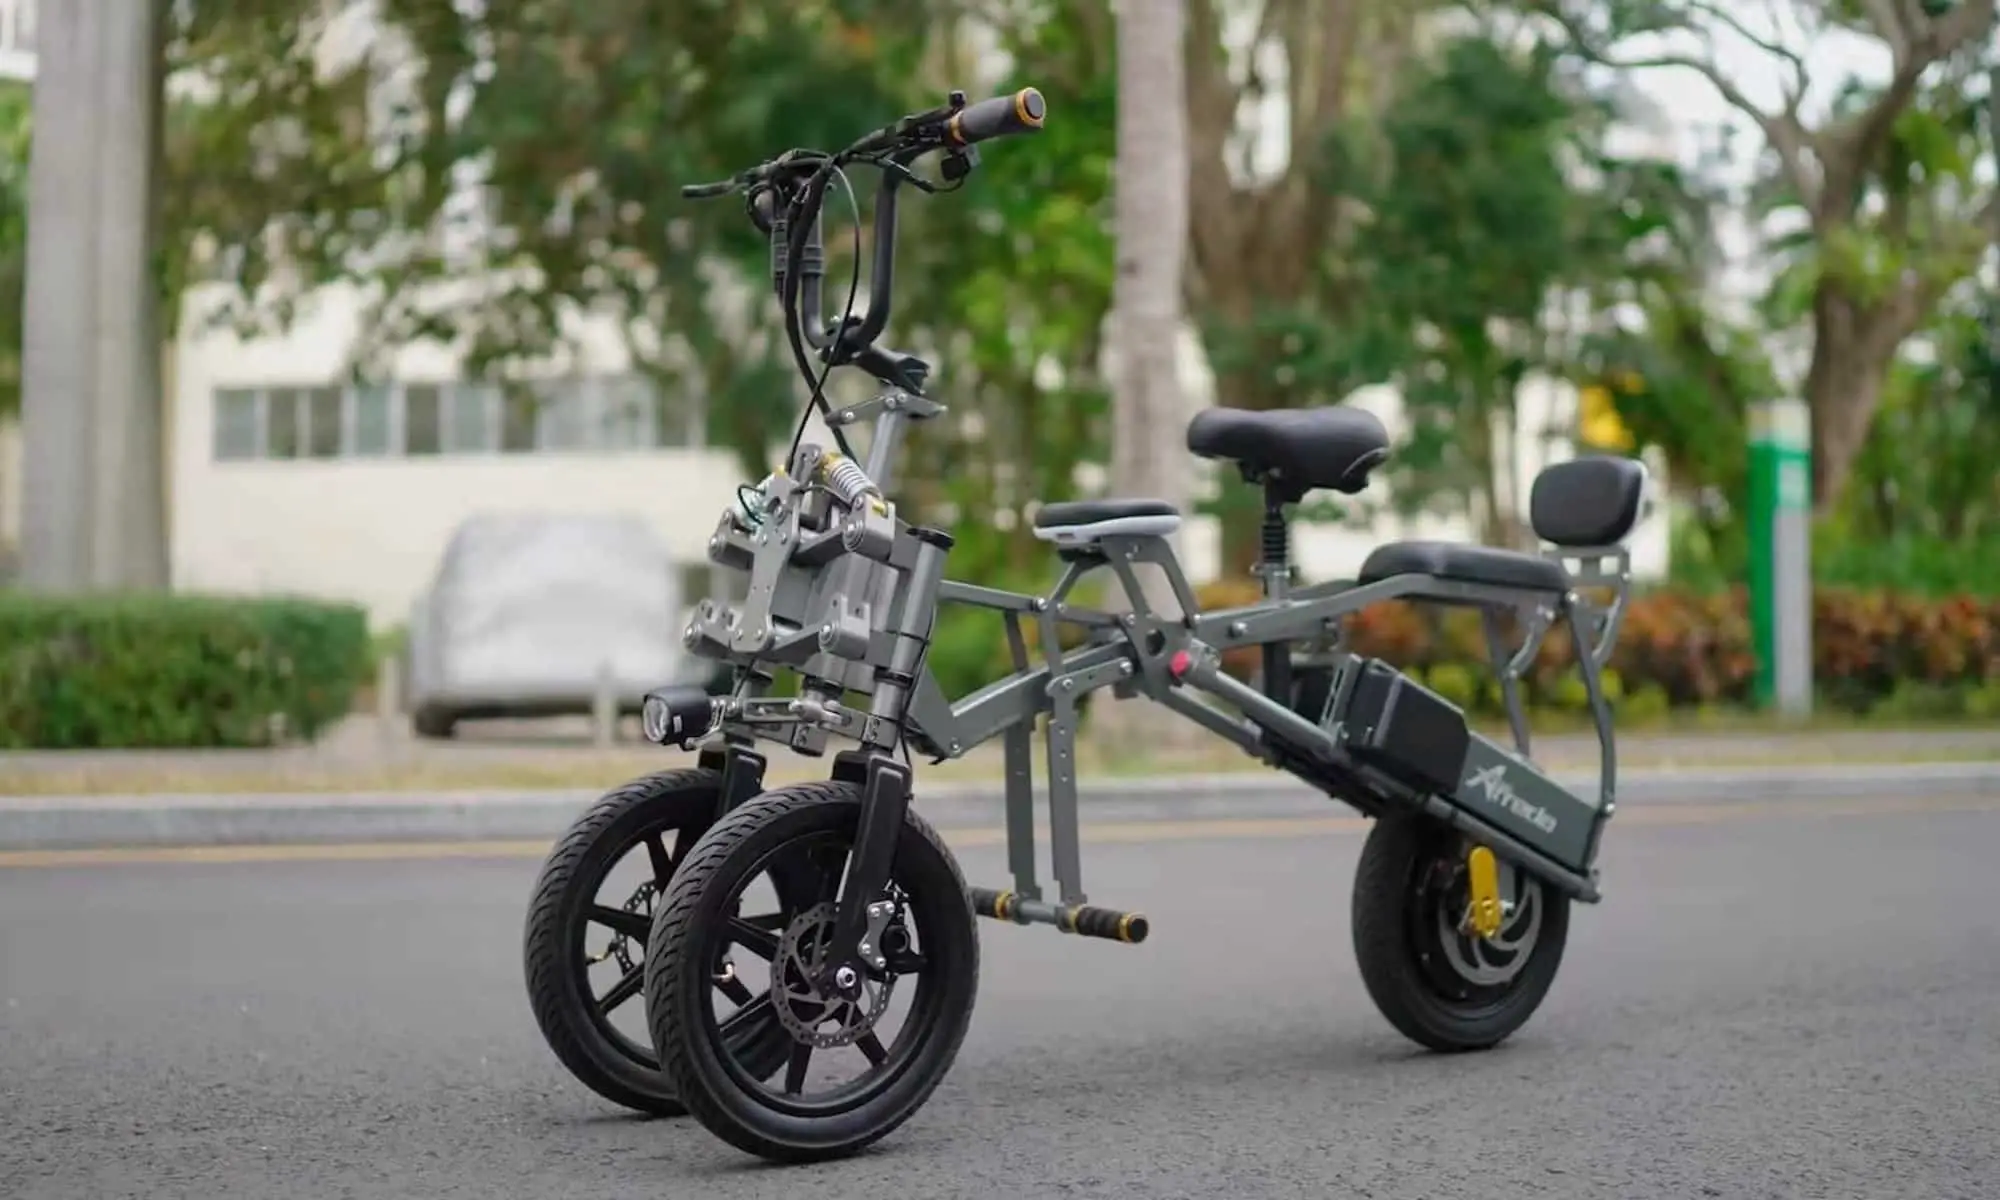 Meet the reverse 3-wheeler that folds in 1 second and adapts to any terrain